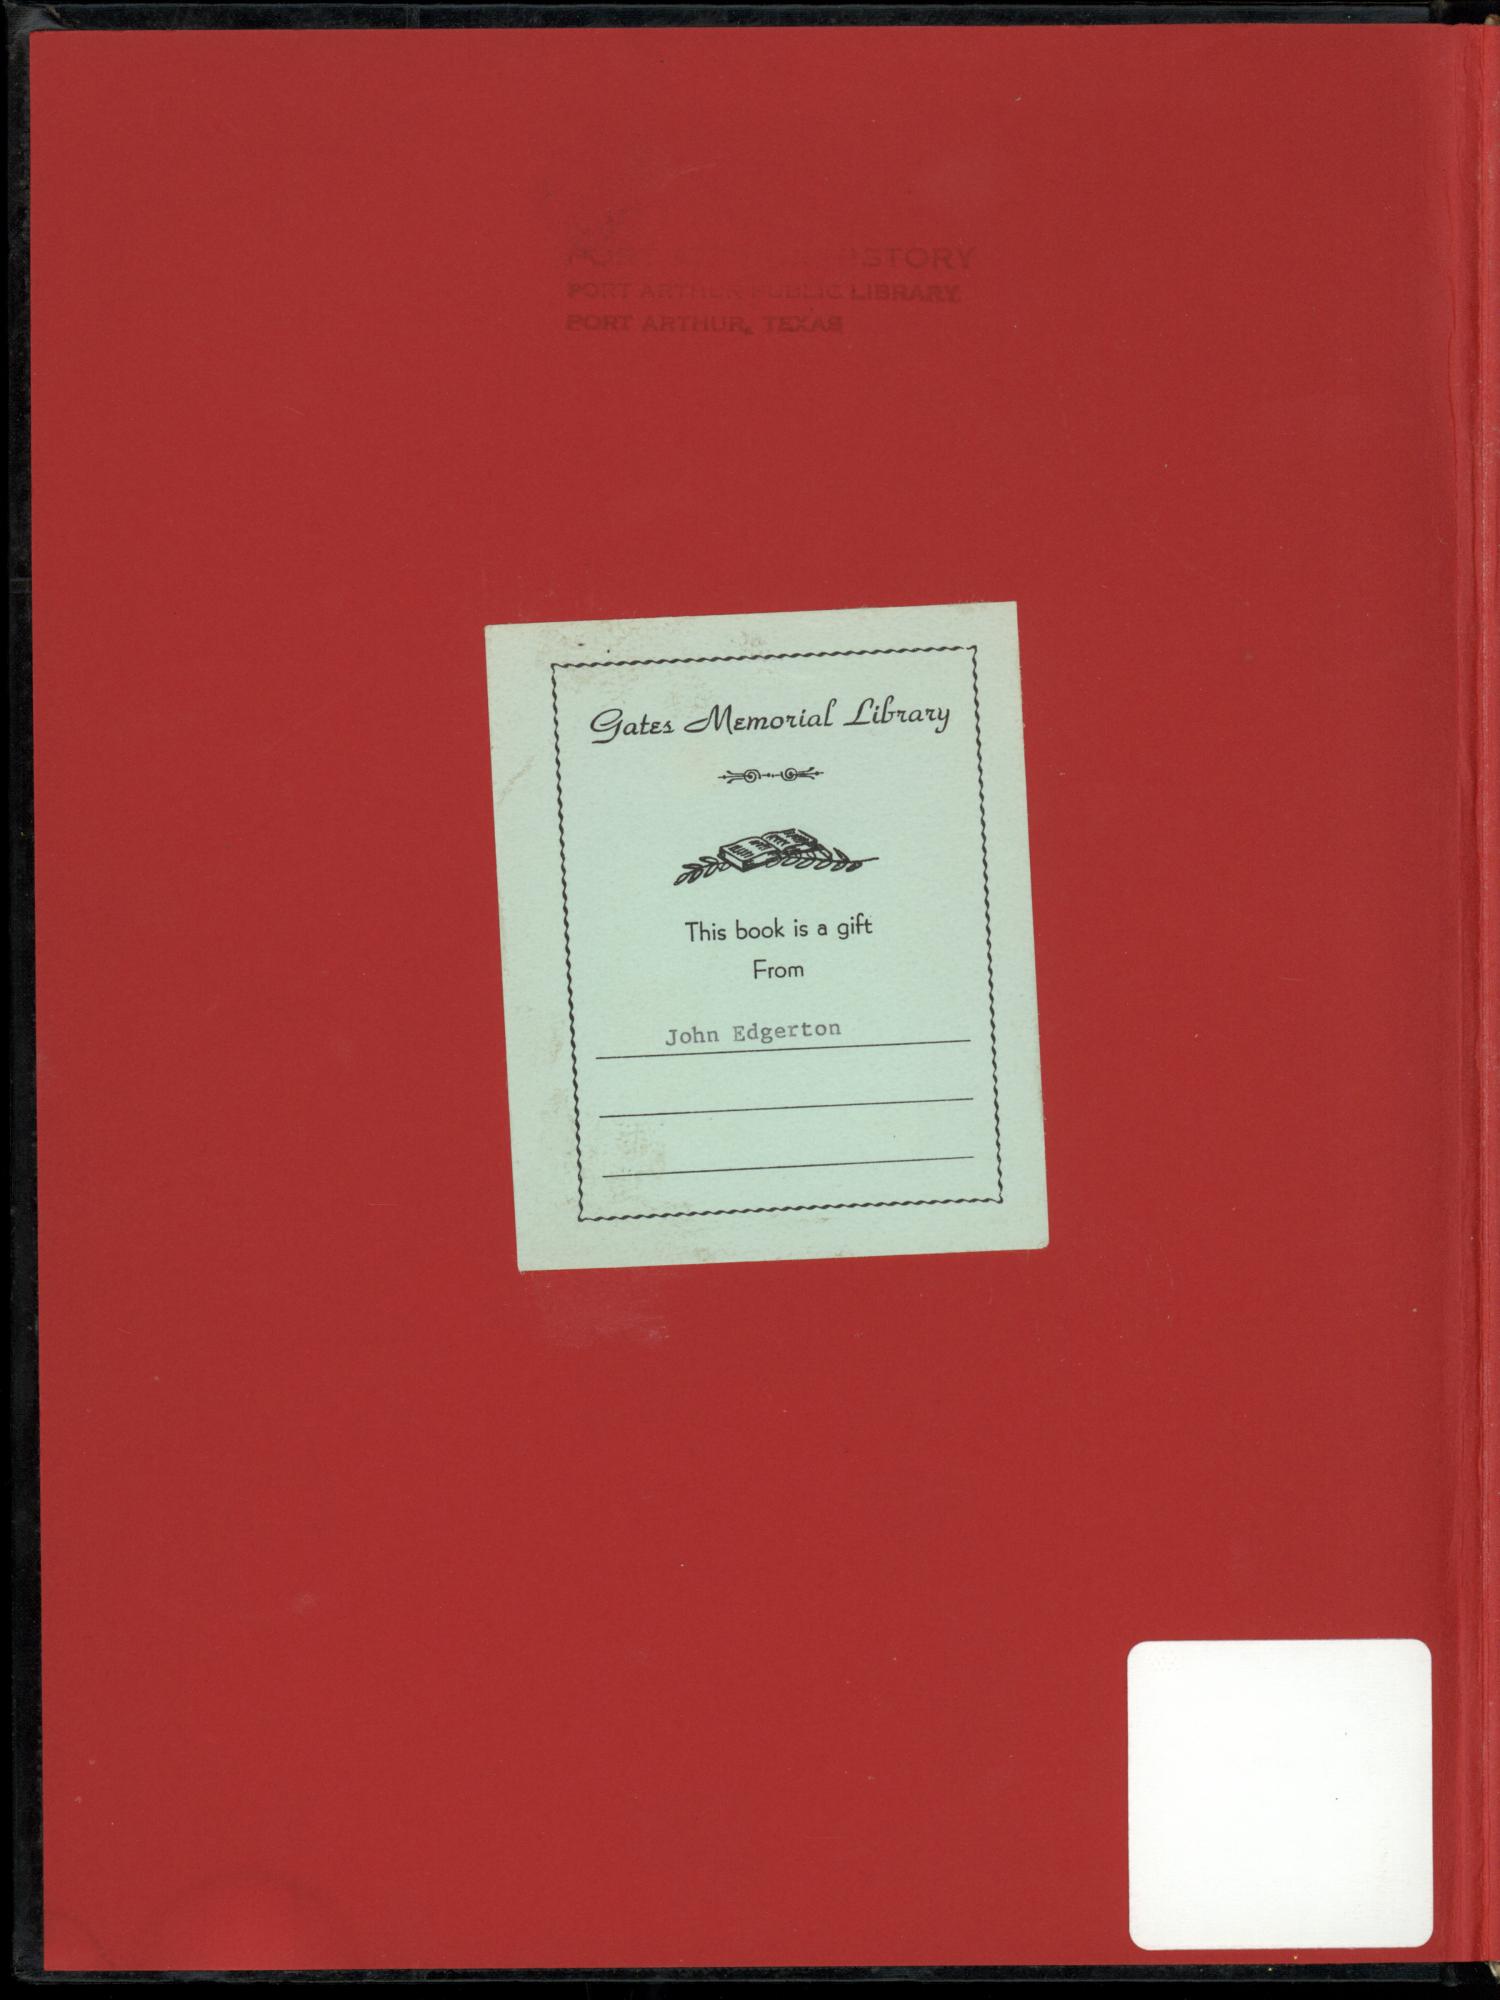 The Cardinal, Yearbook of Lamar State College of Technology, 1962
                                                
                                                    Front Inside
                                                